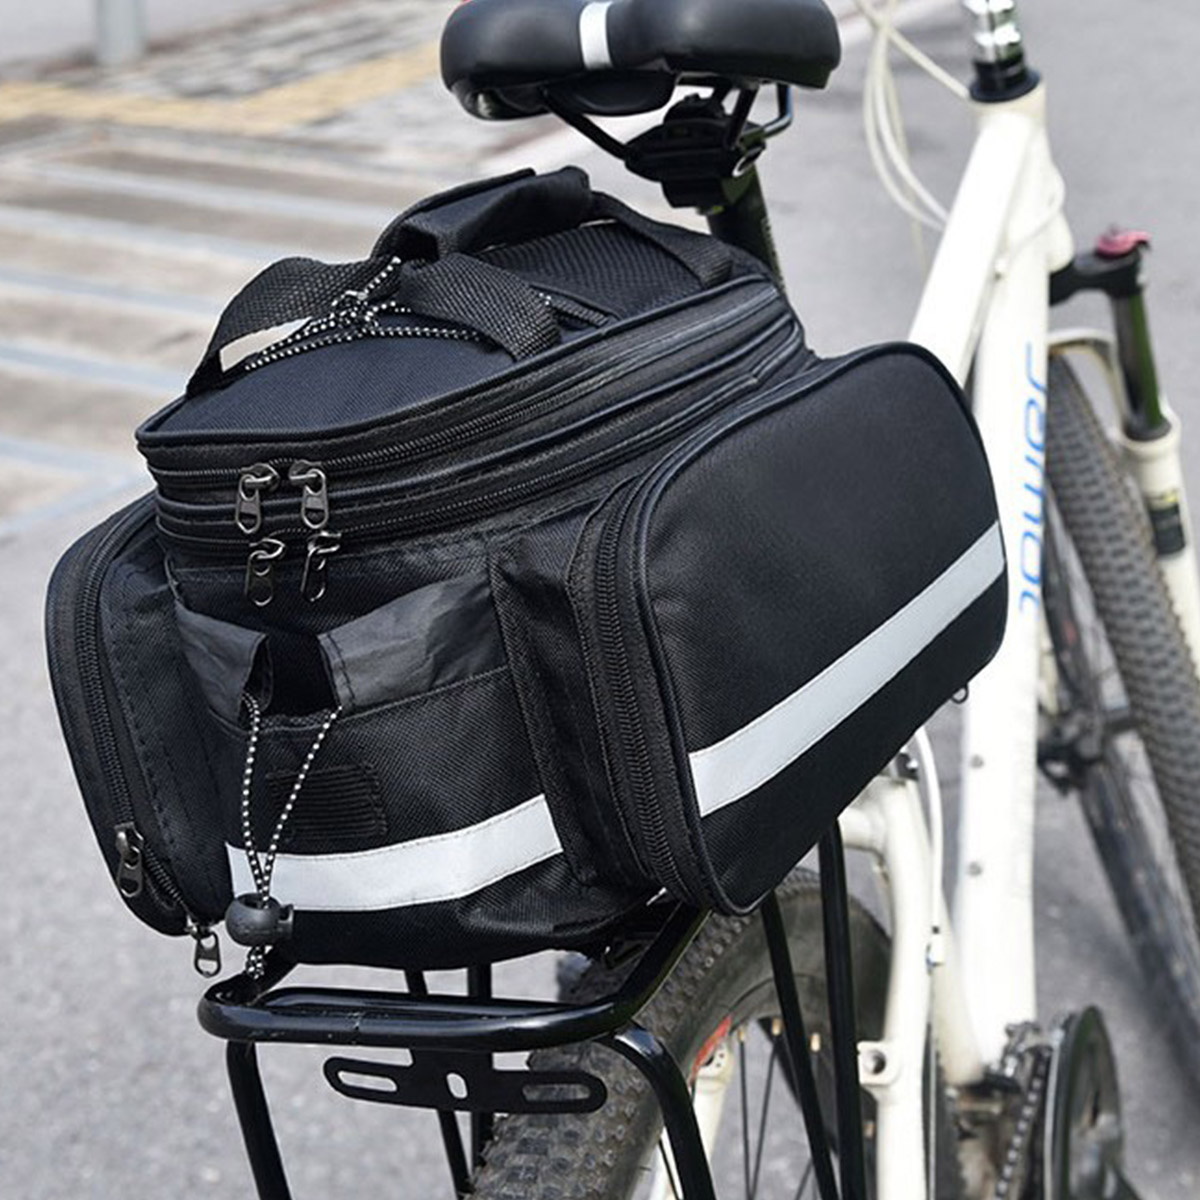 27L-Bicycle-Riding-Package-Large-Capacity-Waterproof-Reflective-Strips-Outdoor-Riding-Bag-1874551-2